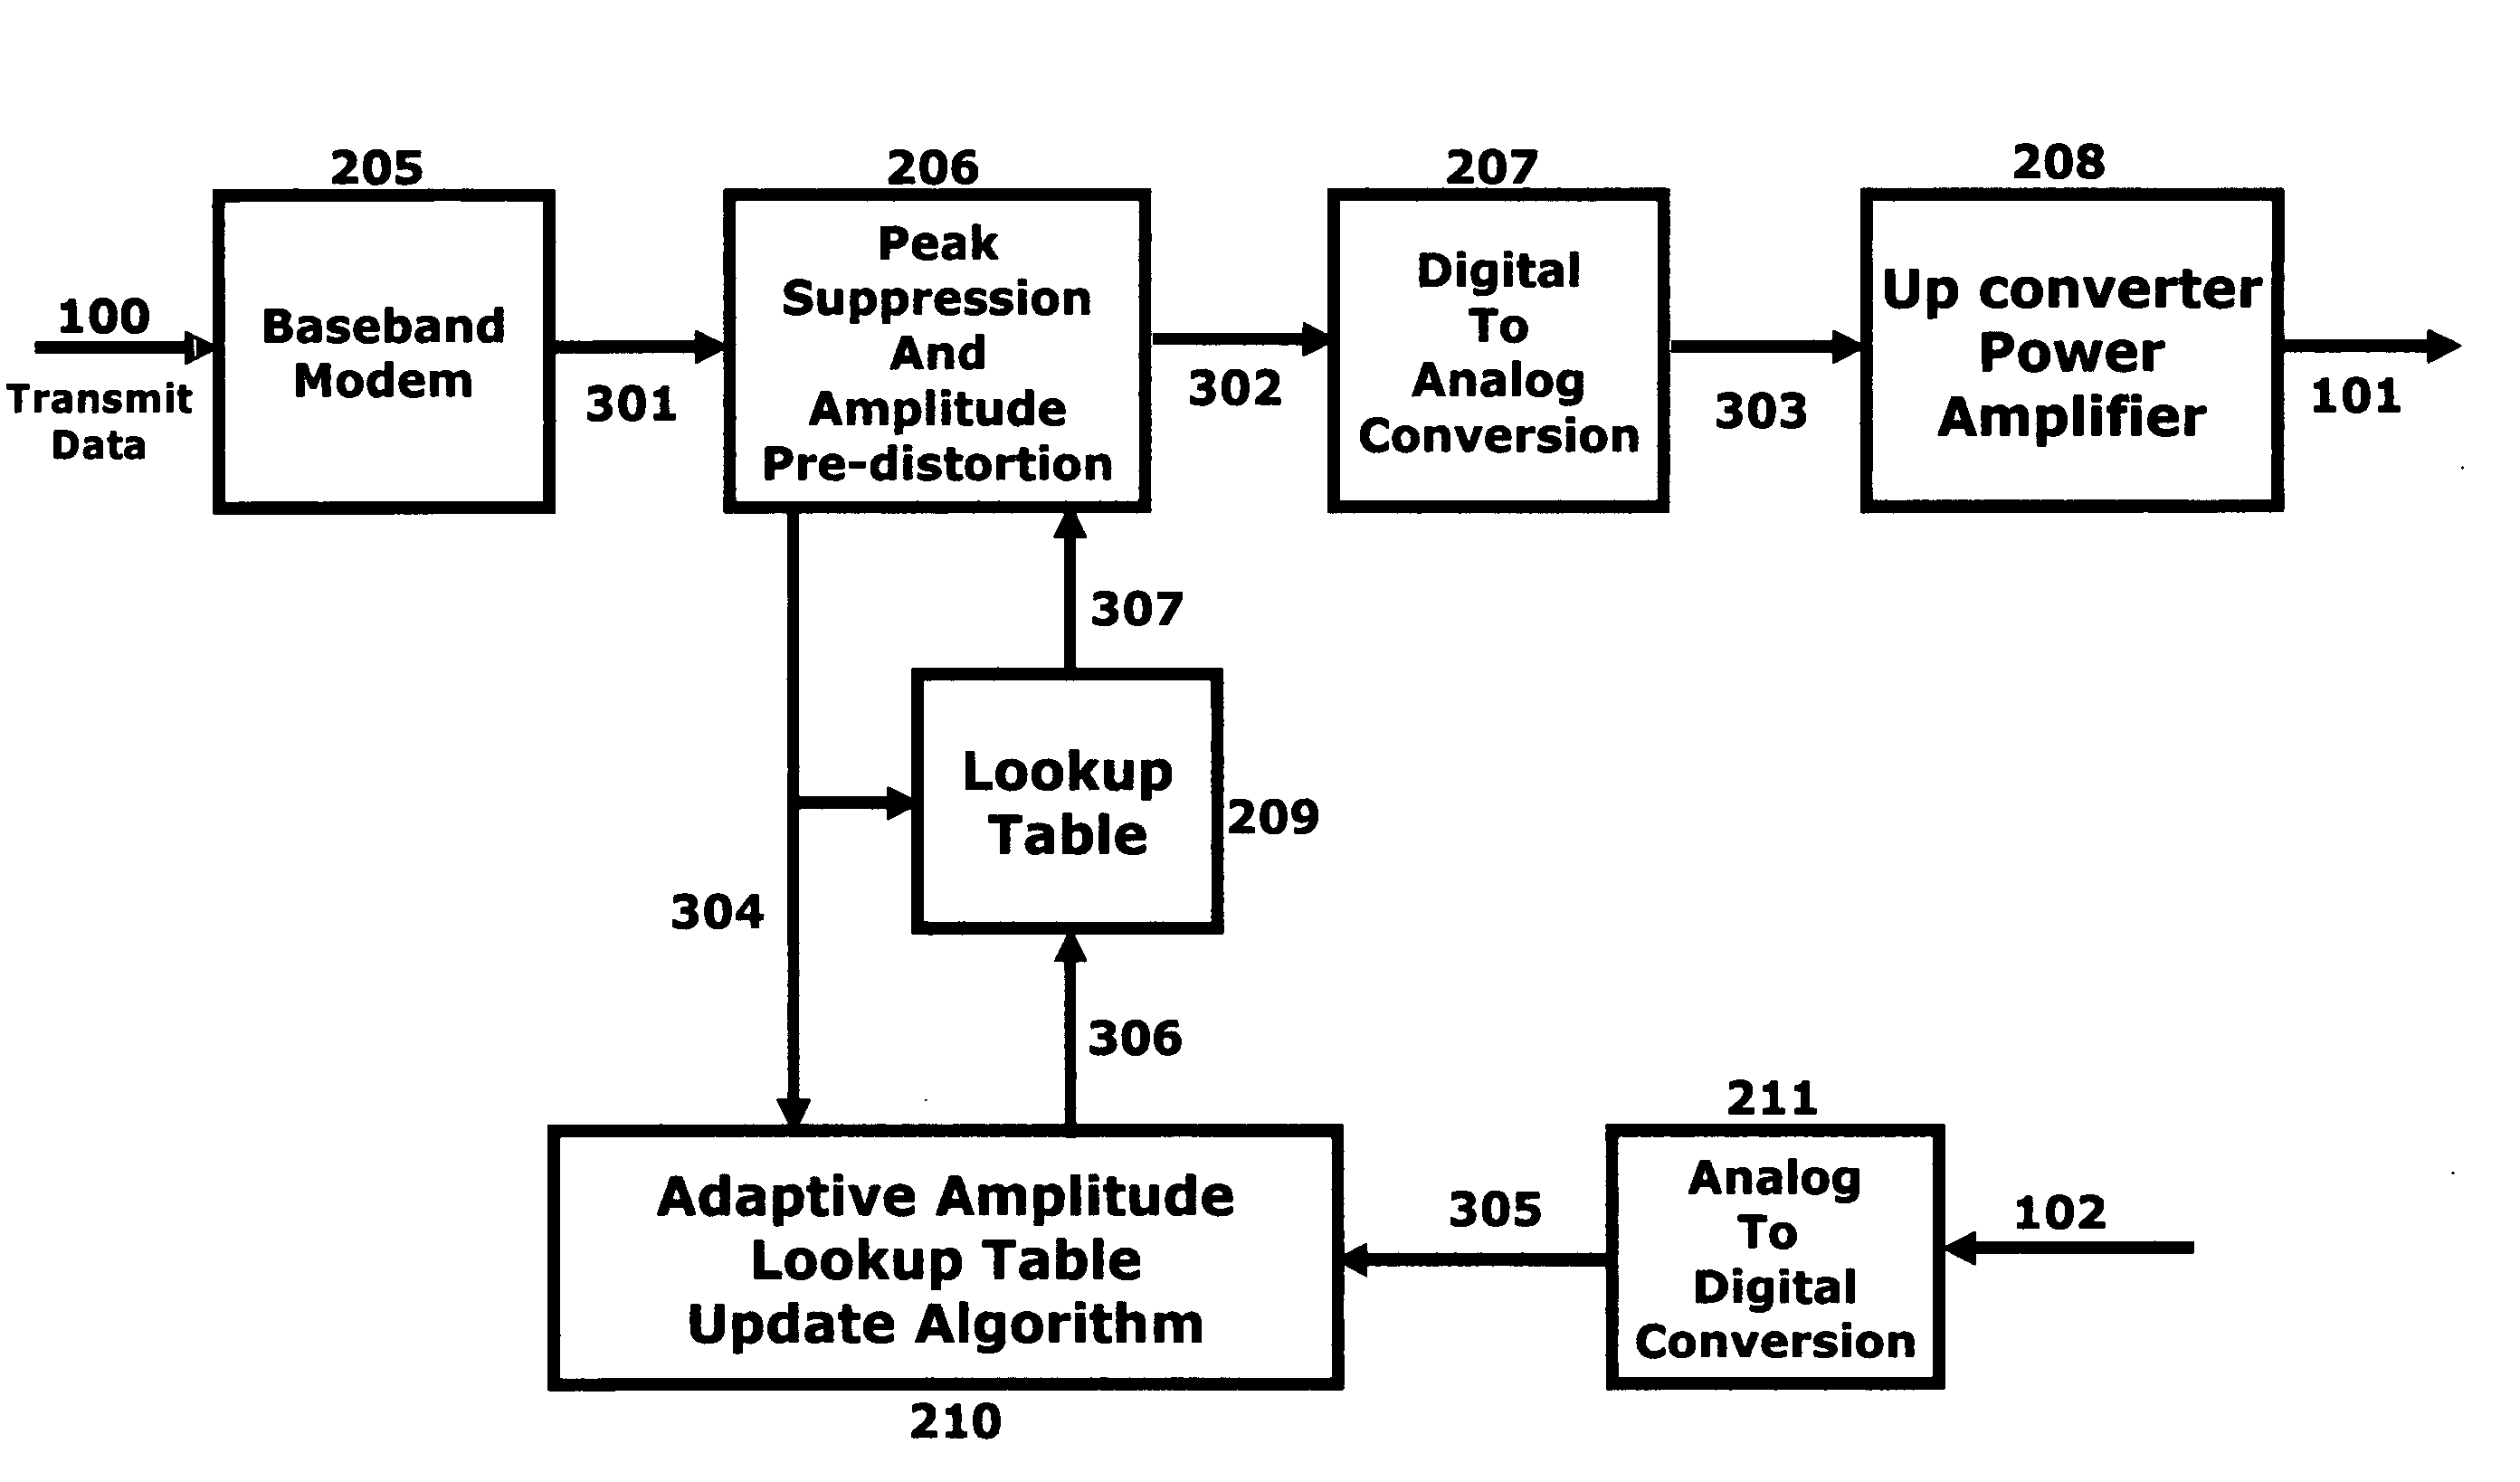 Power booster using peak suppression and pre-distortion for terminal radios